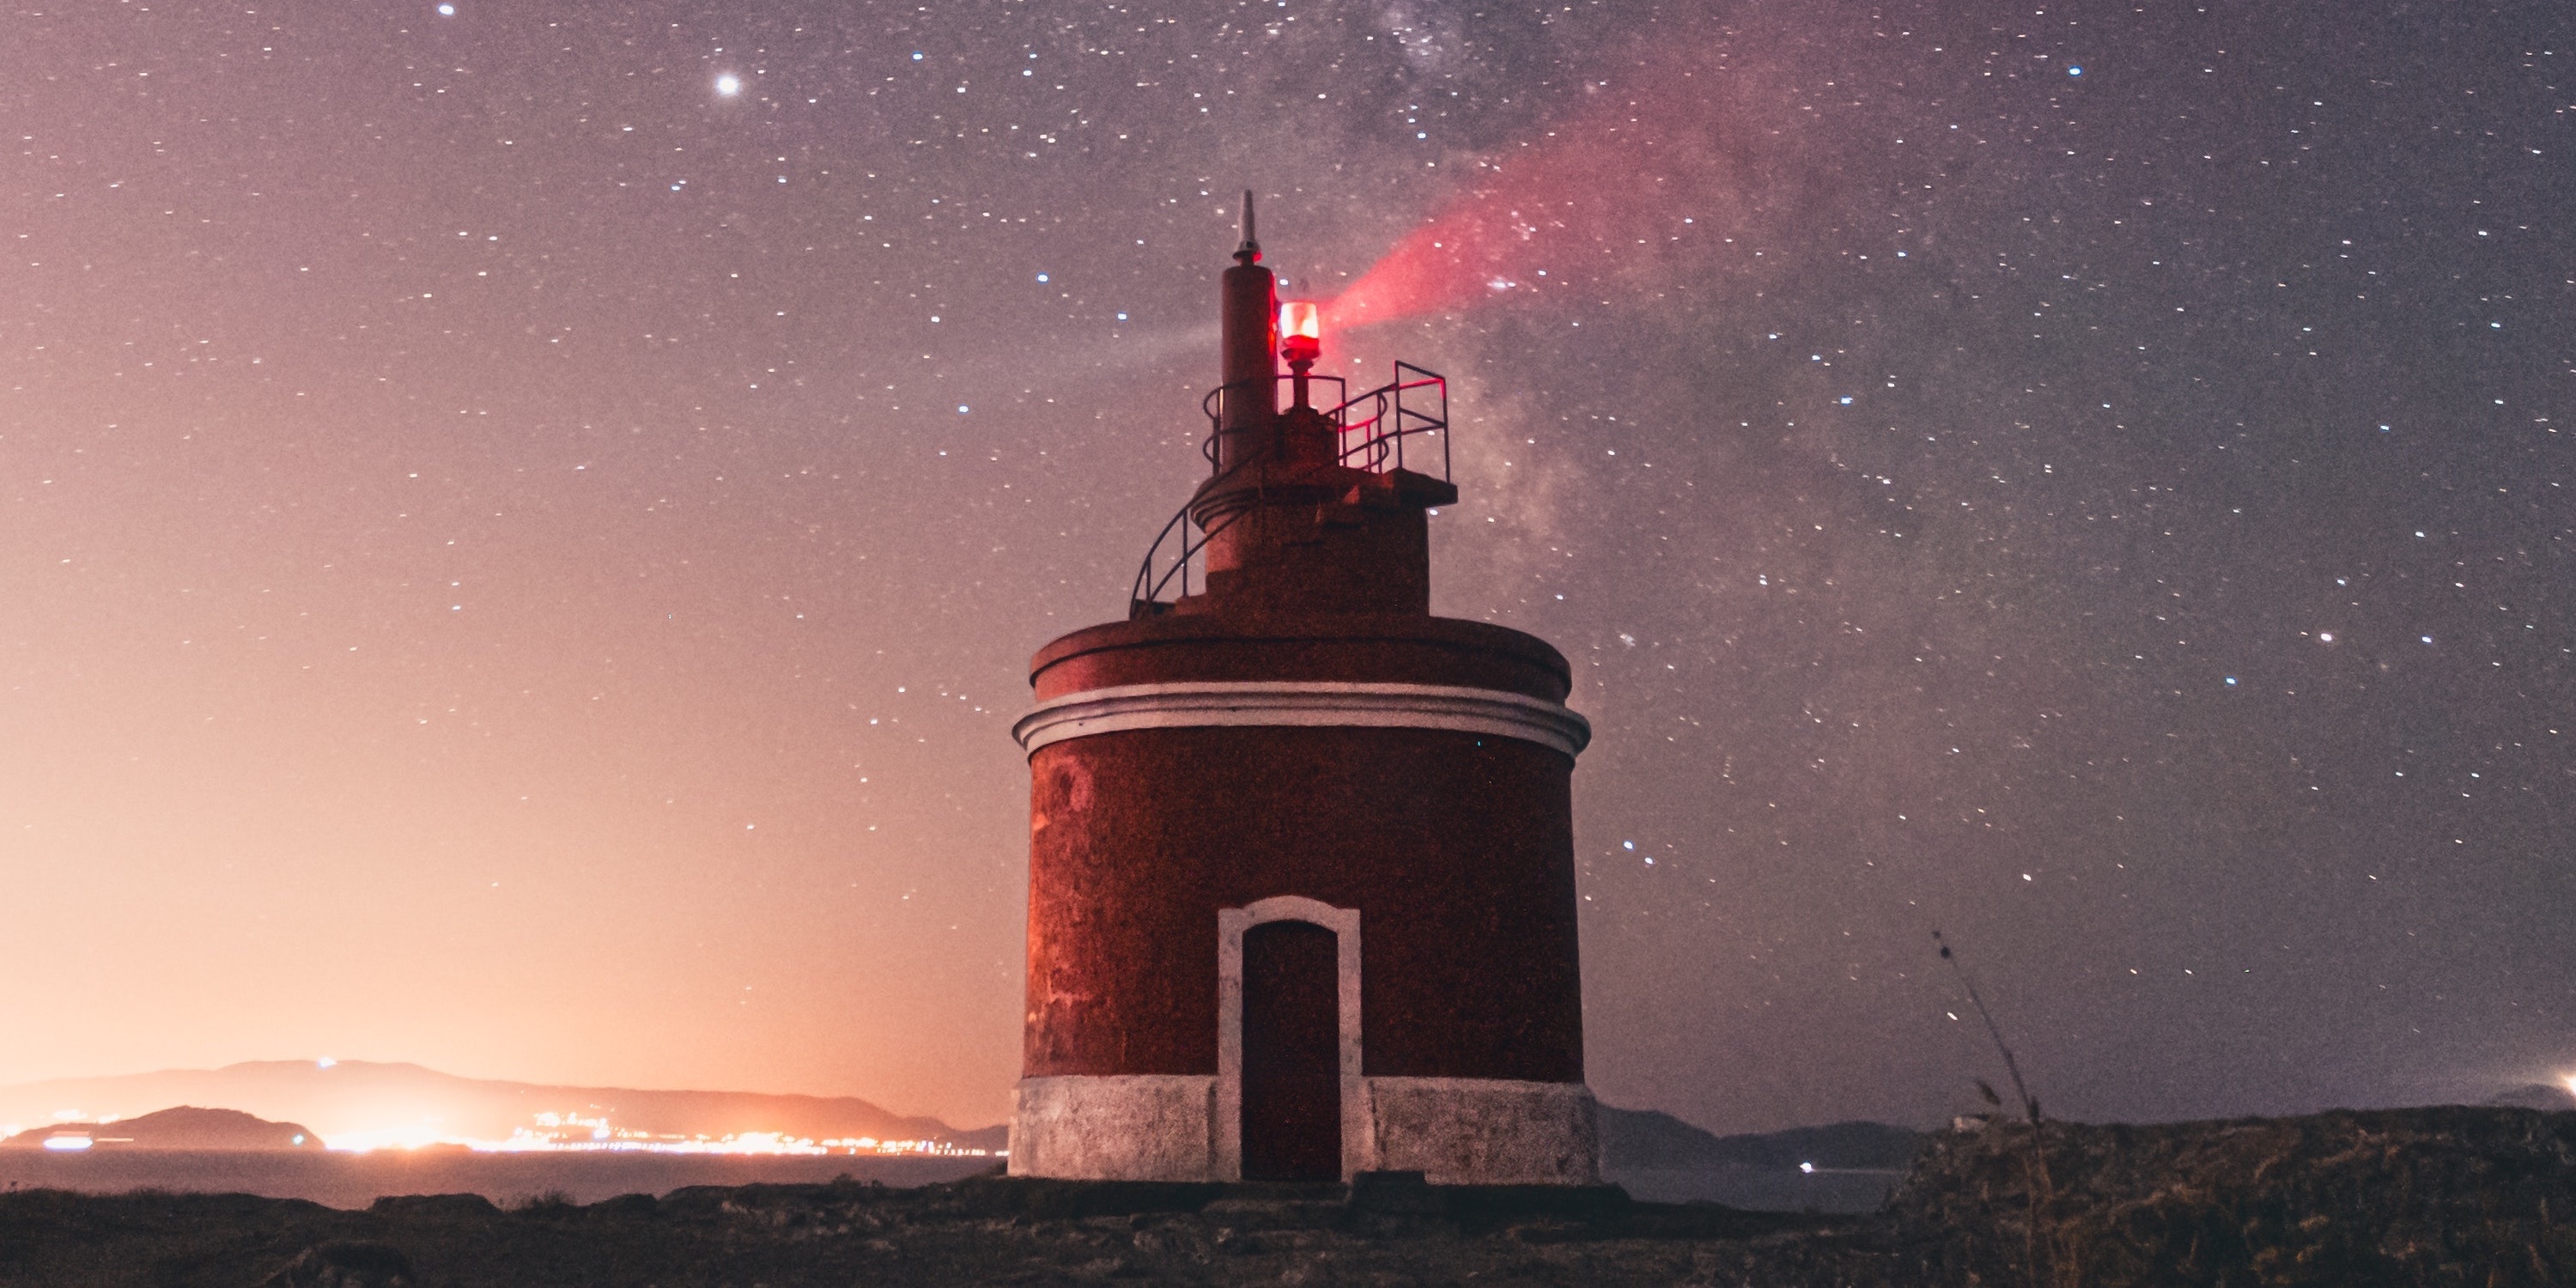 Lighthouse with visible light beam under the milky way galaxy